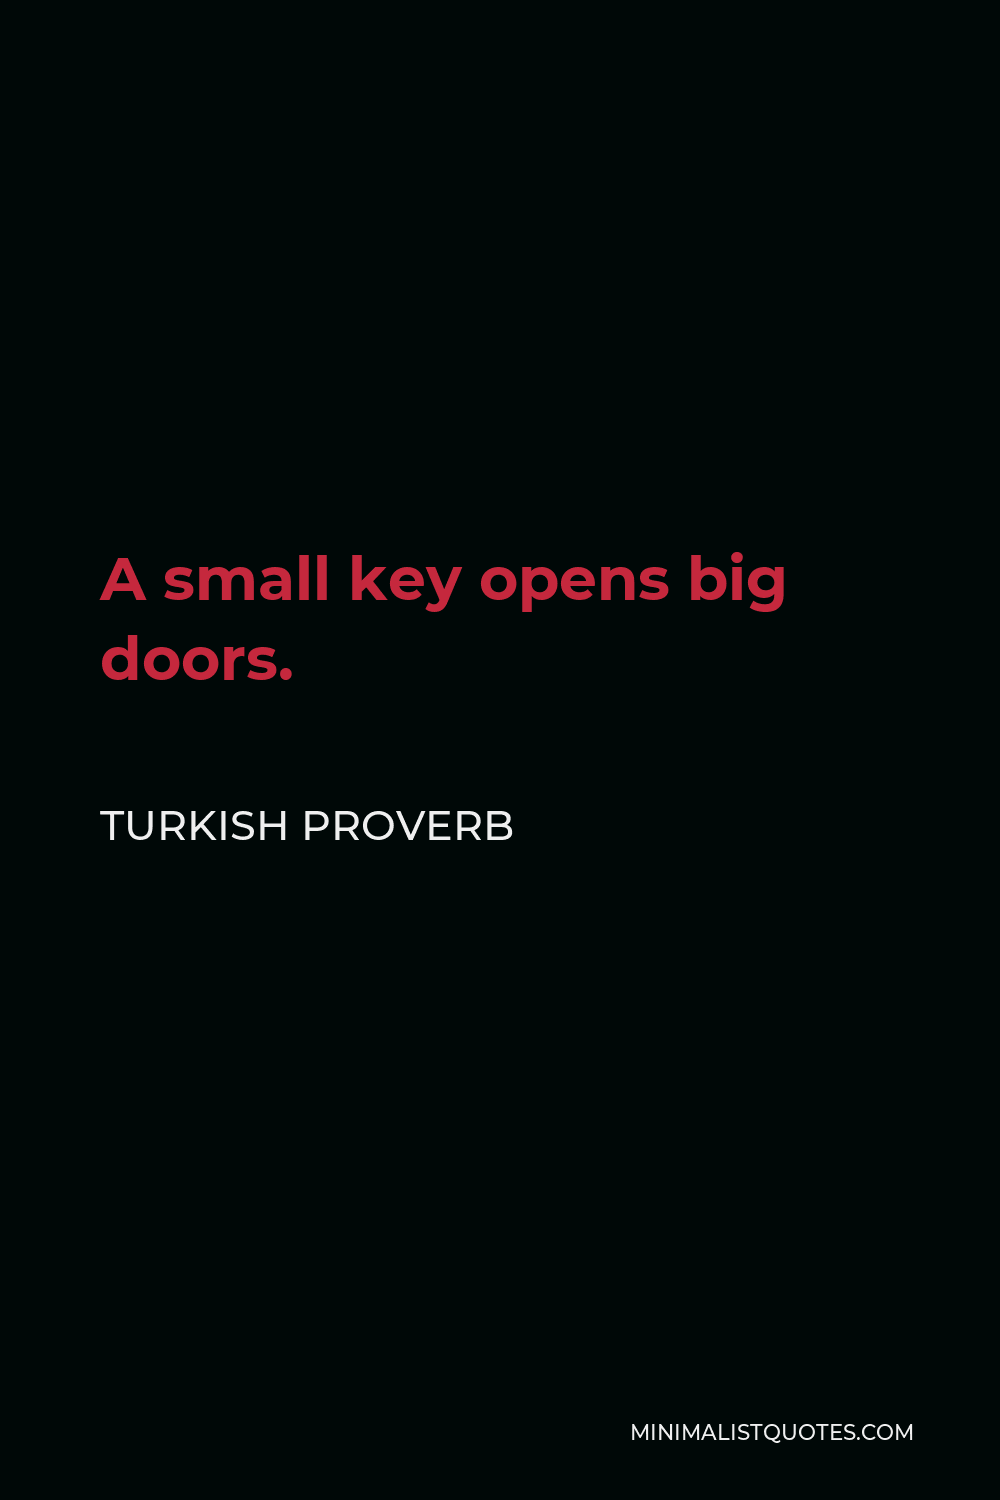 Turkish Proverb Quote - A small key opens big doors.